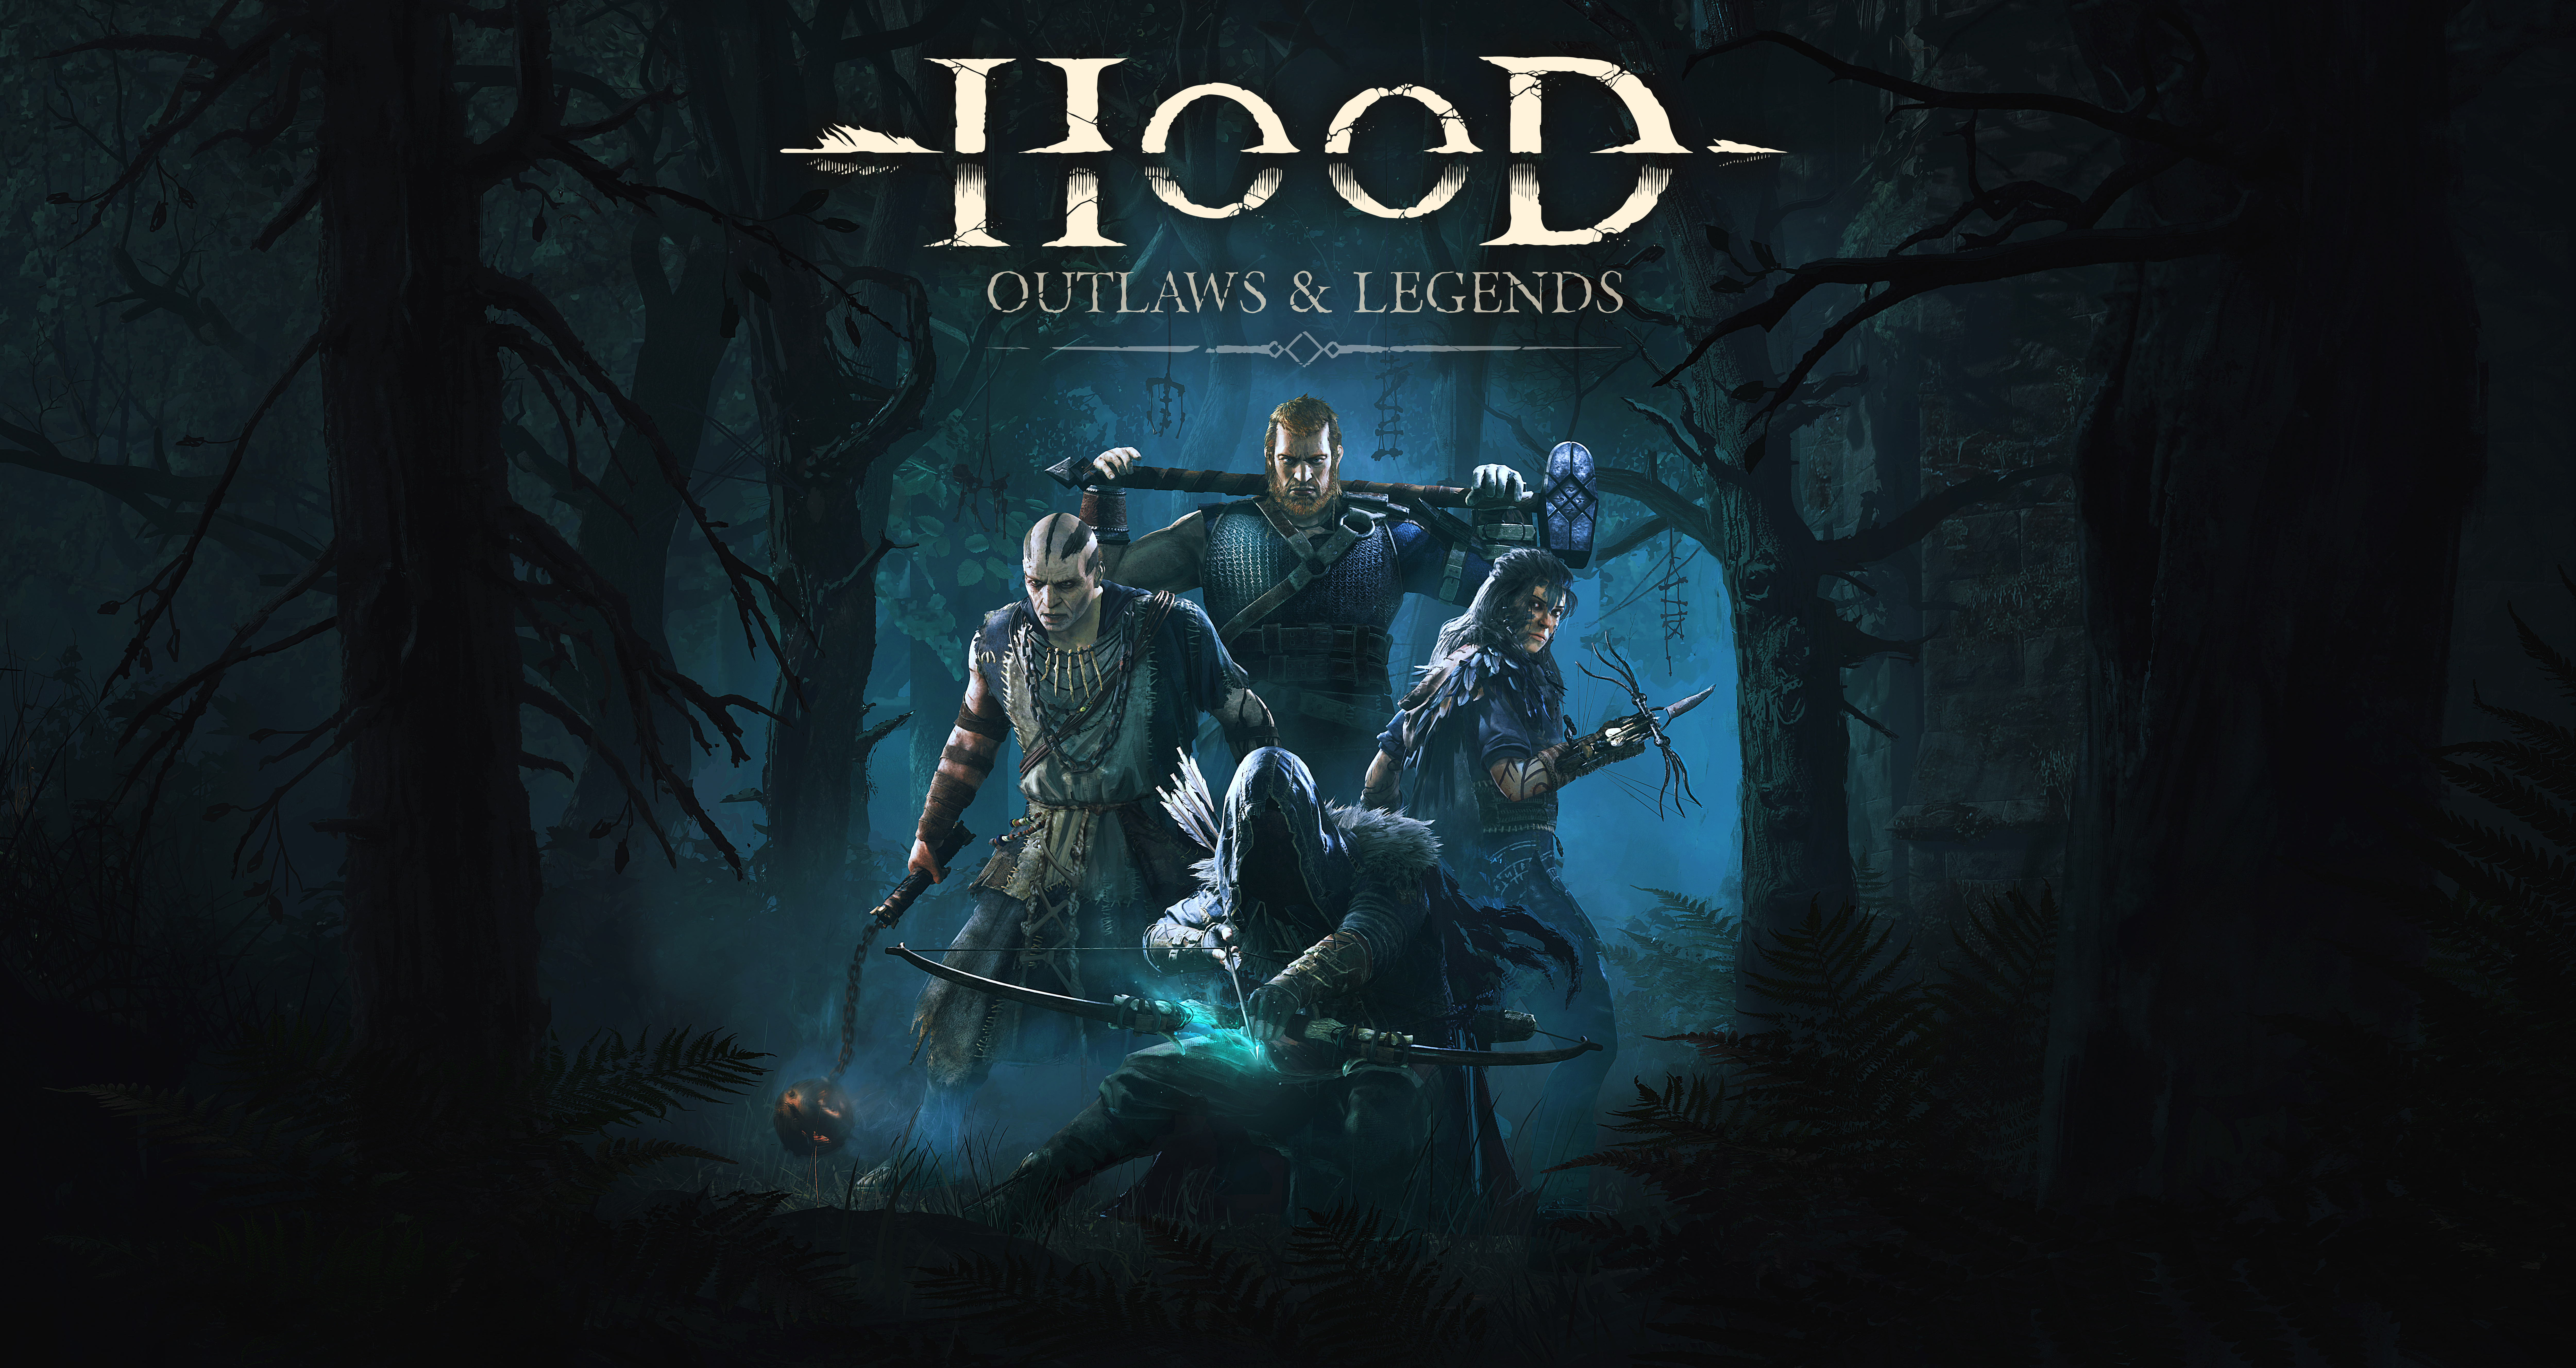 Video Game Hood: Outlaws & Legends HD Wallpaper | Background Image